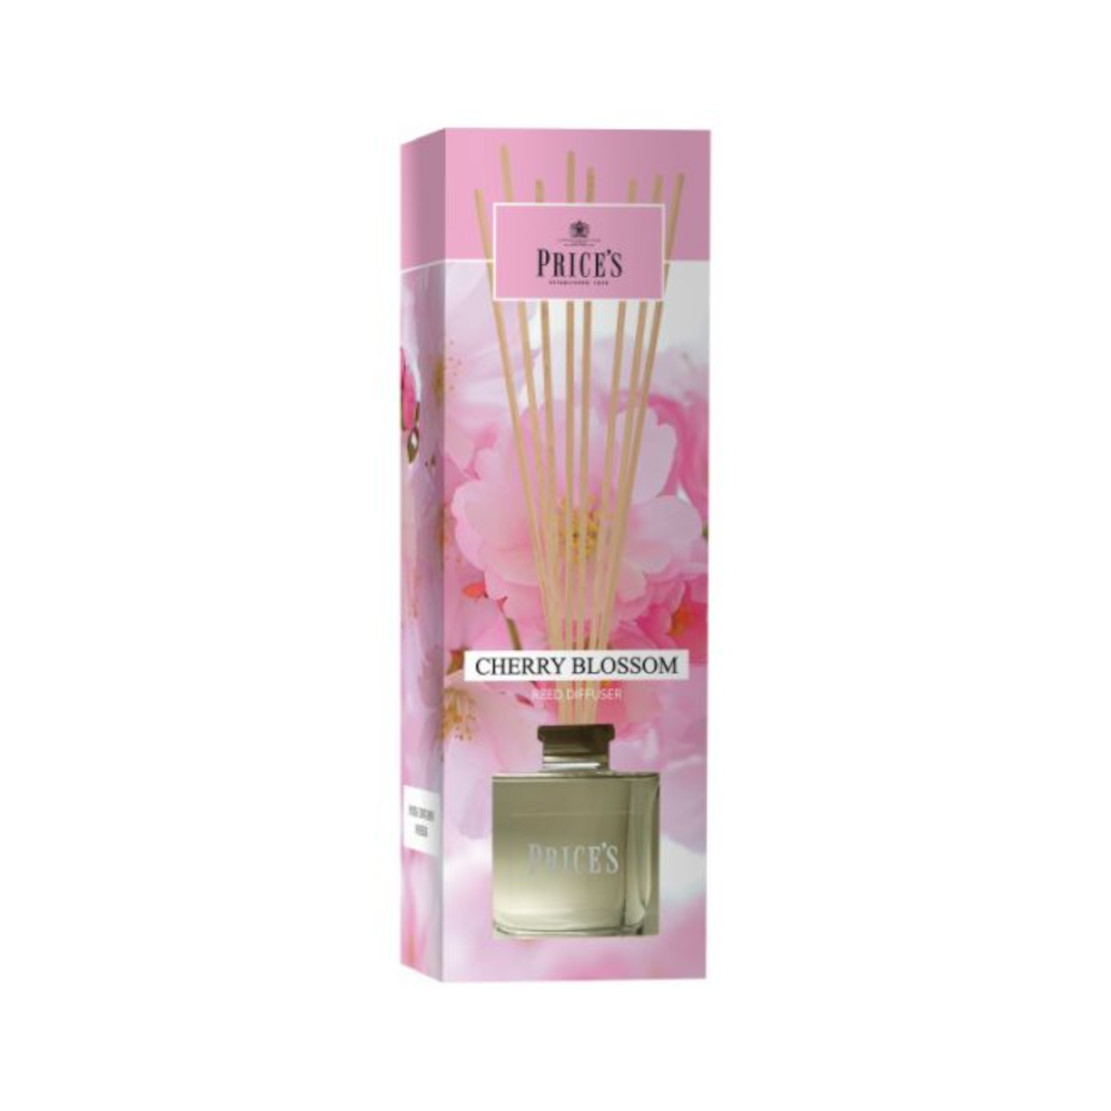 Prices Candles Cherry Blossom Reed Diffuser 100ml